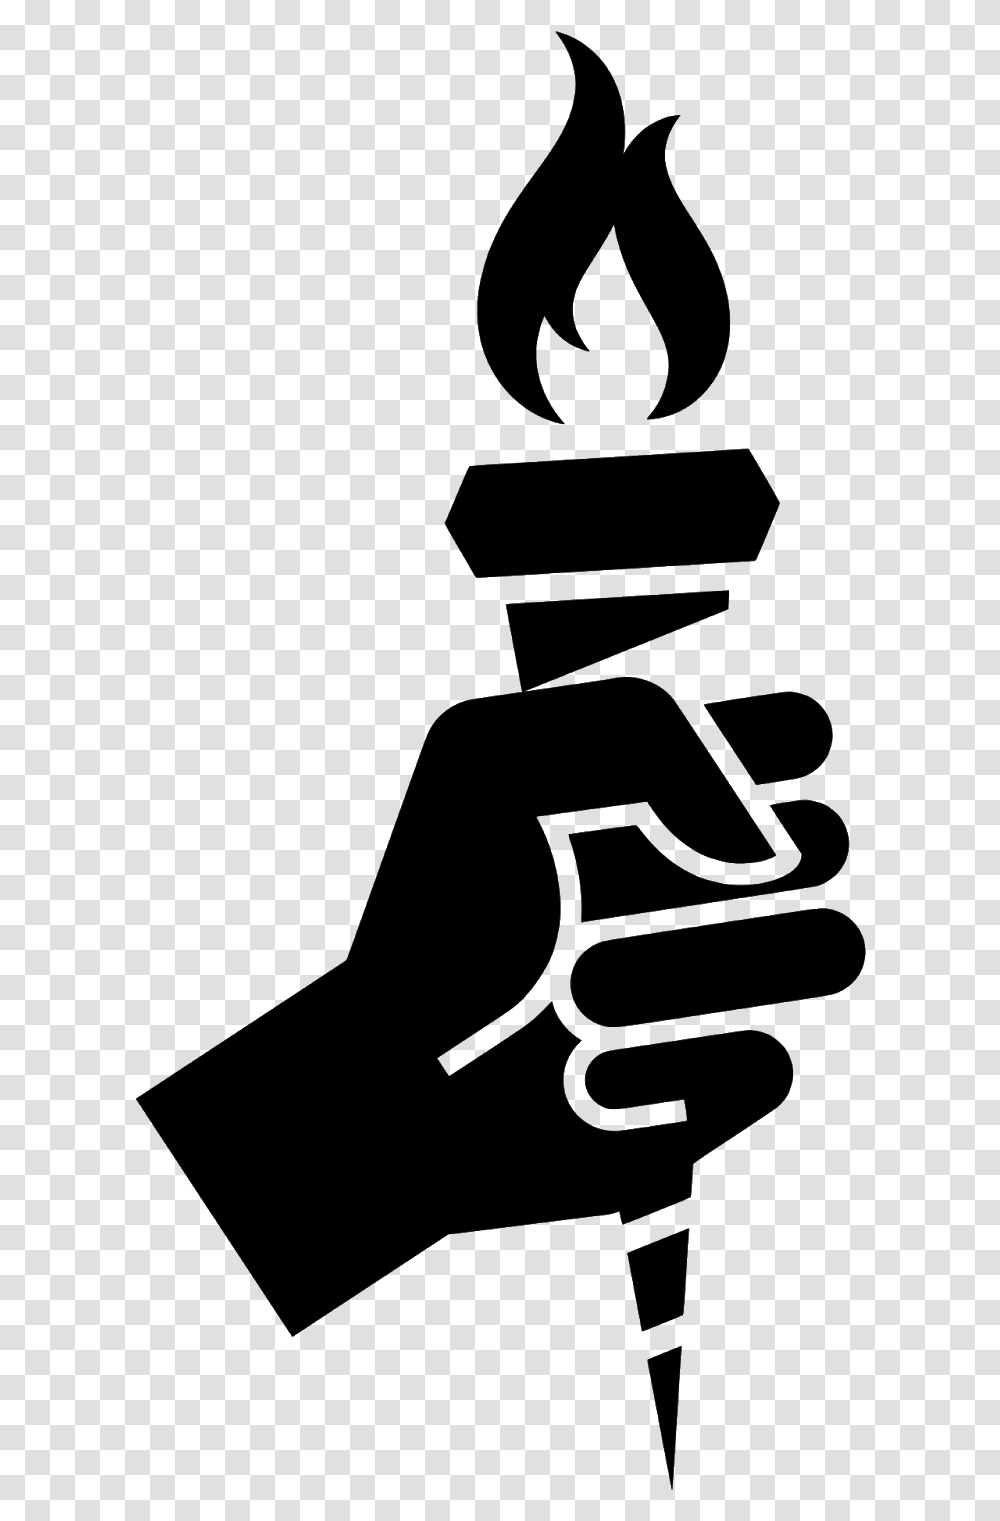 Torch Hand Silhouette Fire Flaming Clutching Mano Con Antorcha, Gray, World Of Warcraft Transparent Png